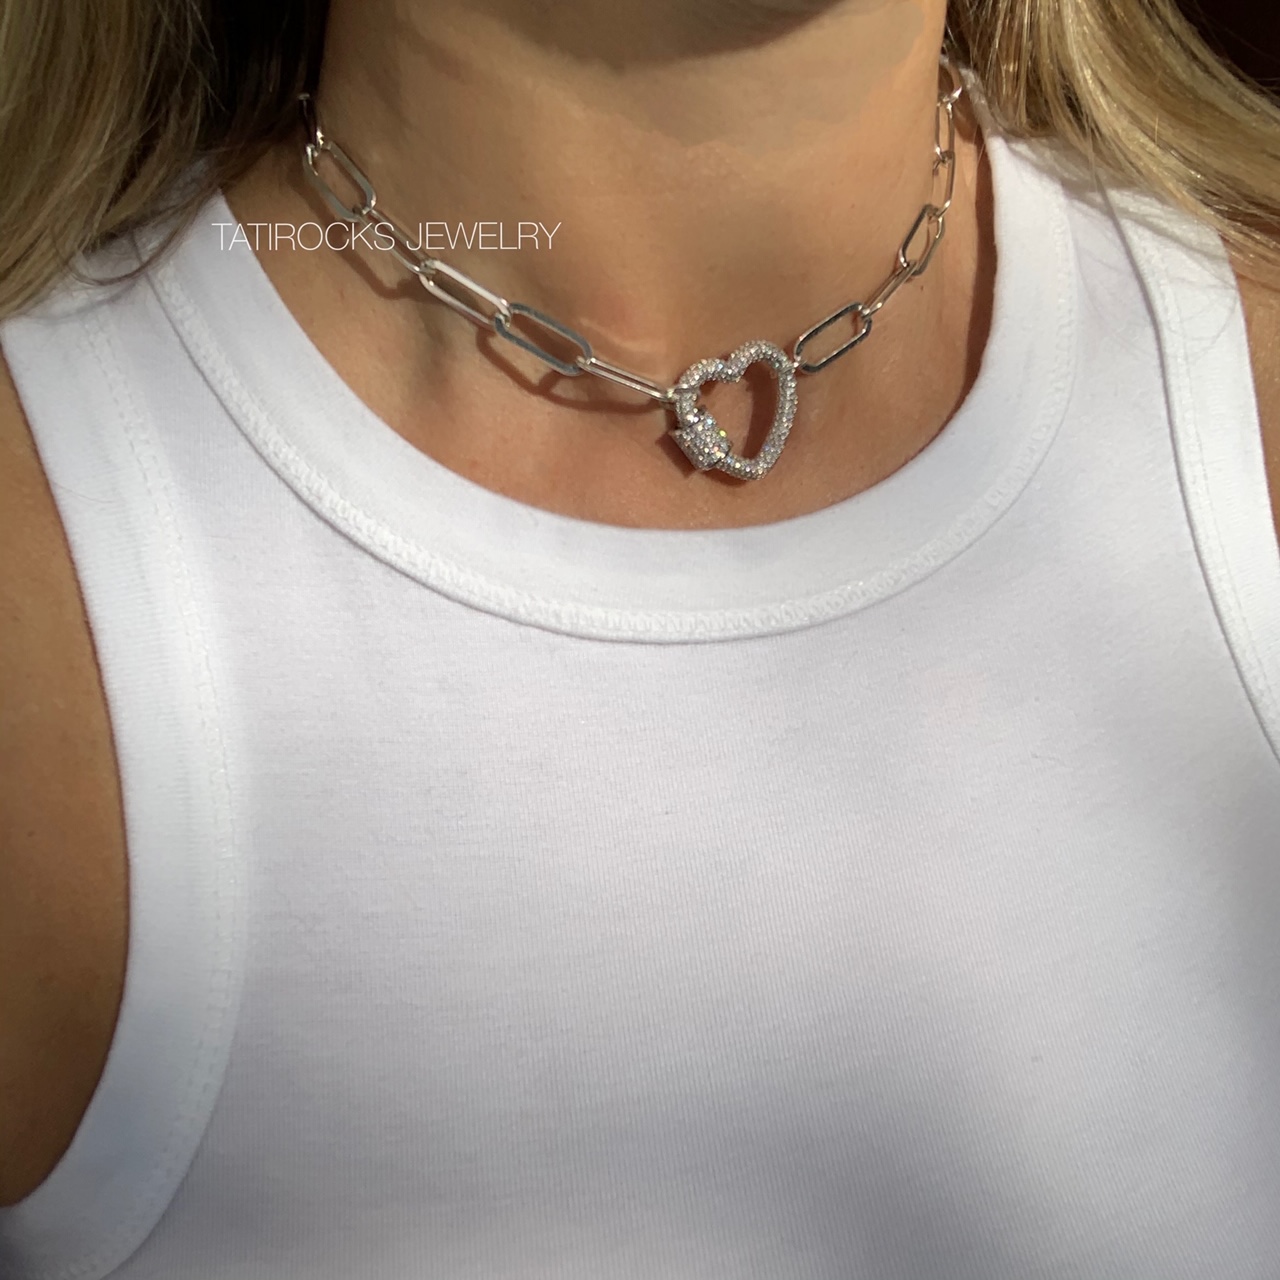 Messy Heart Lock Necklace